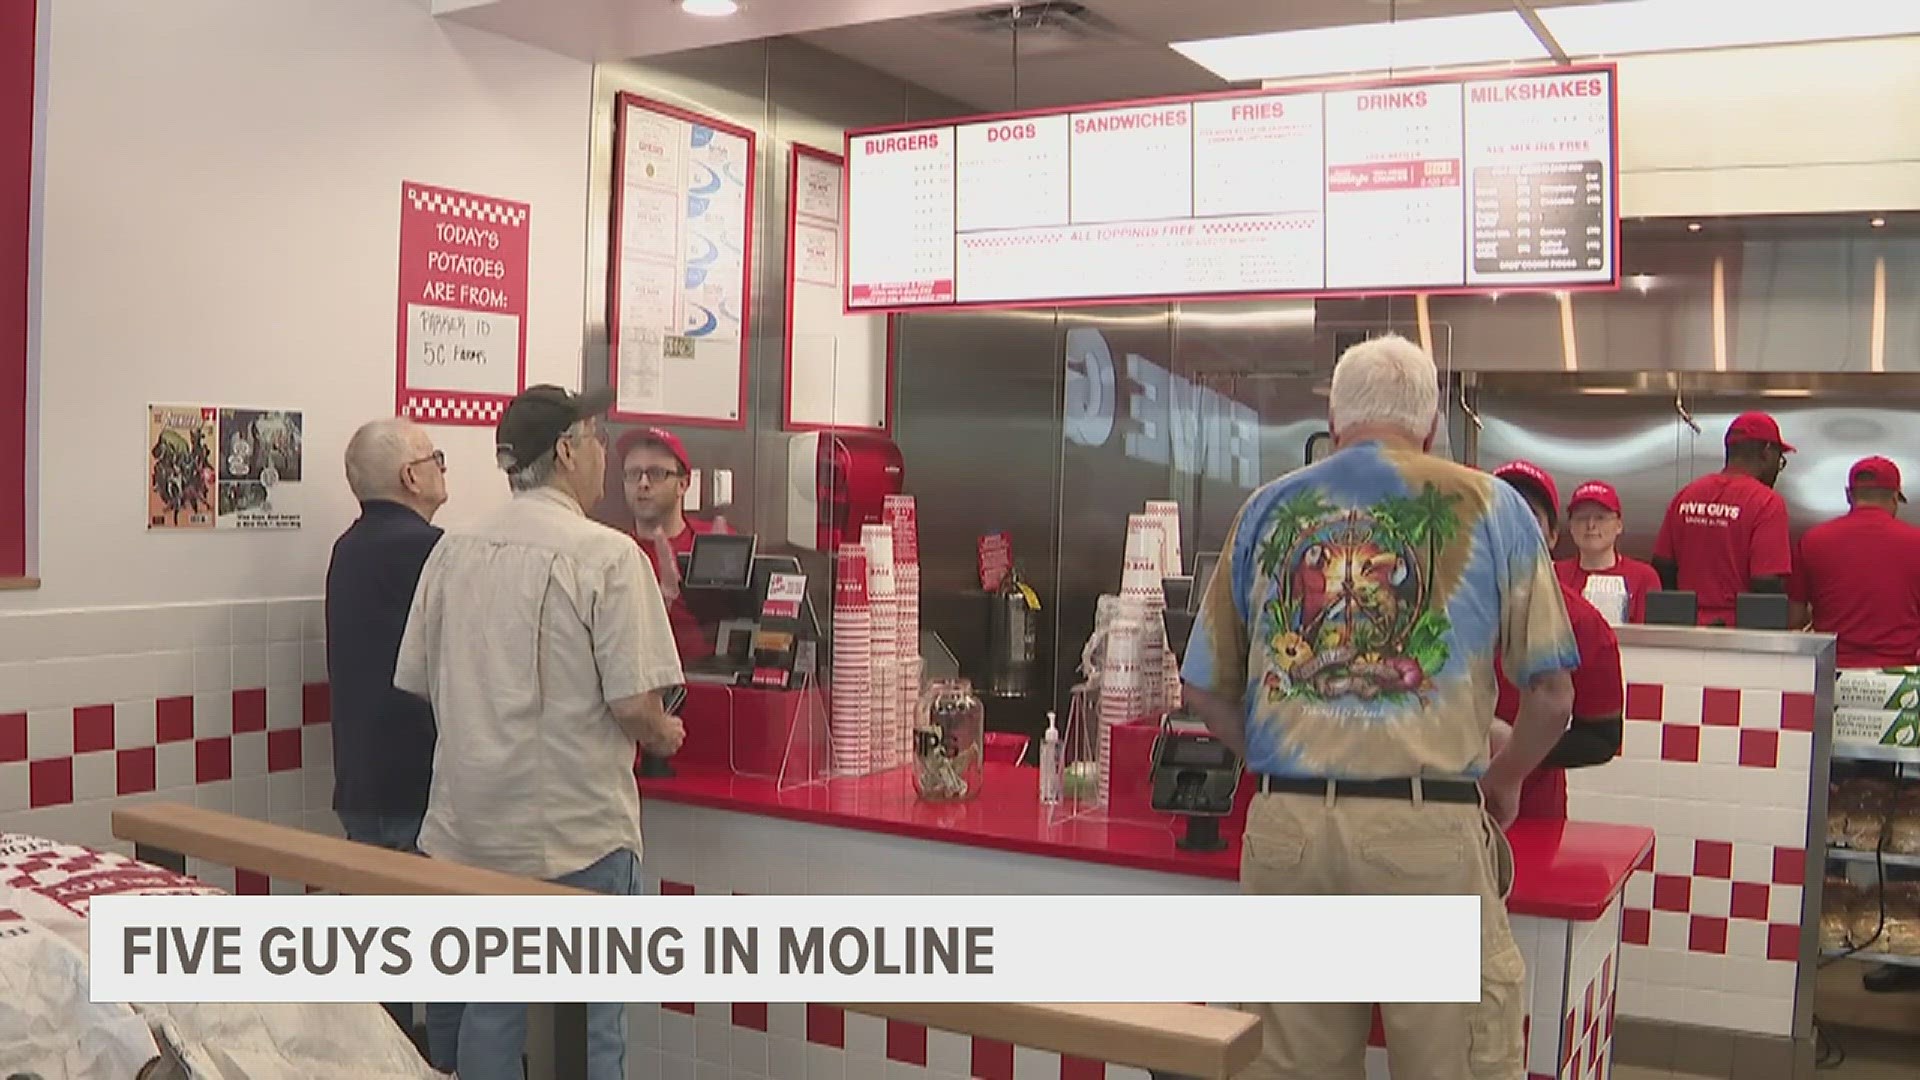 The company is opening a second Five Guys location in Moline this morning. Doors open at 11 a.m. for the lunch rush.